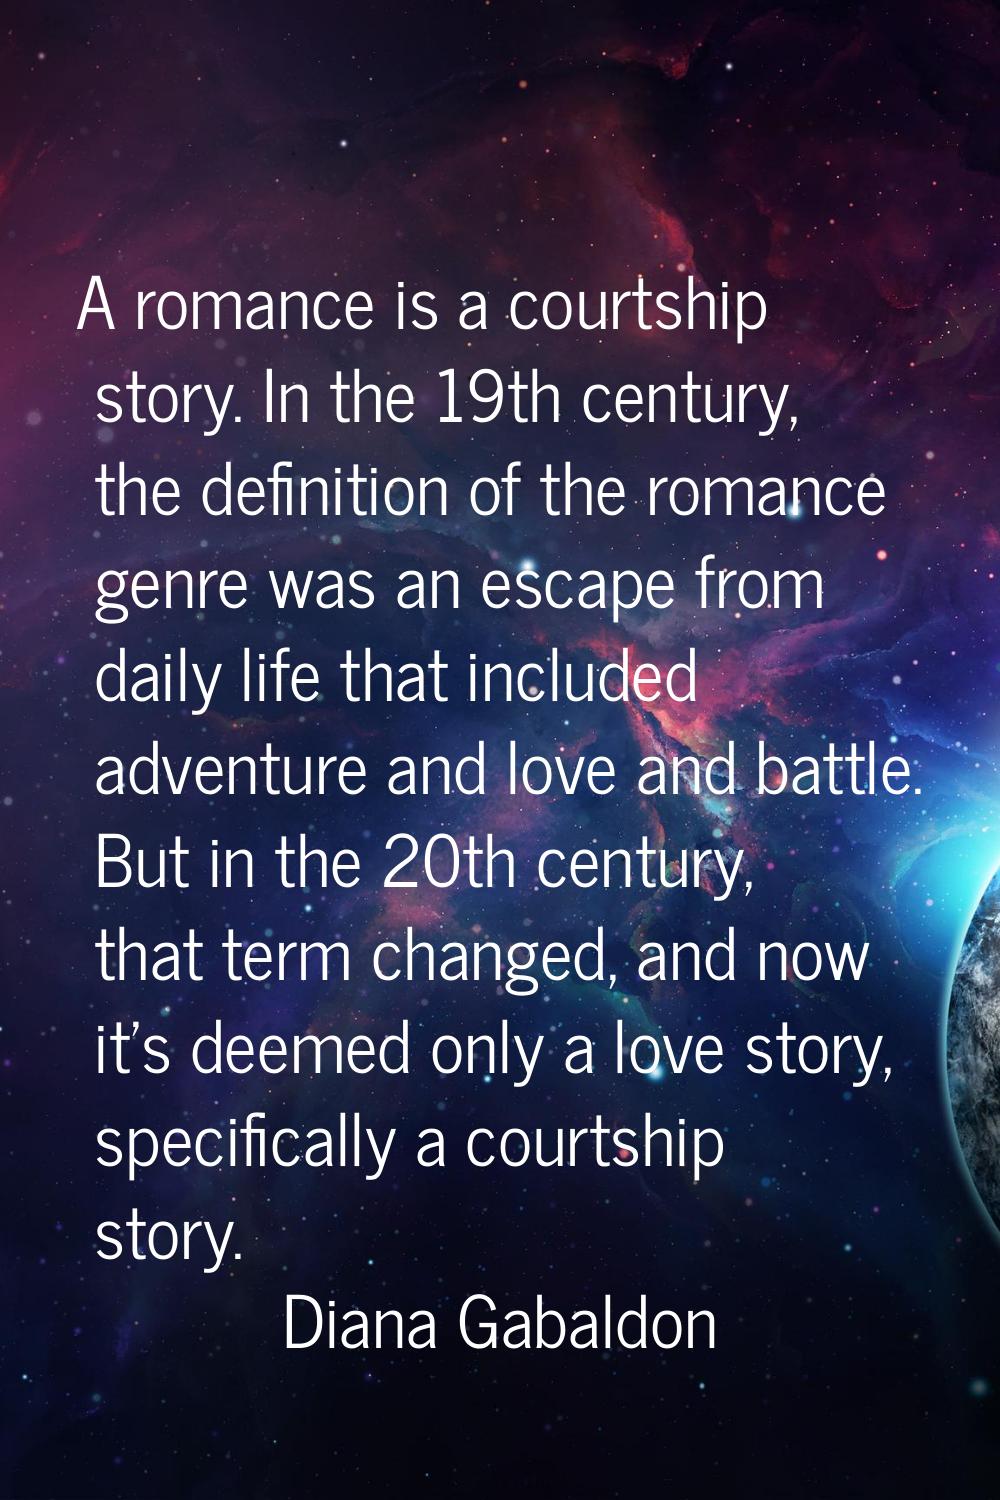 A romance is a courtship story. In the 19th century, the definition of the romance genre was an esc